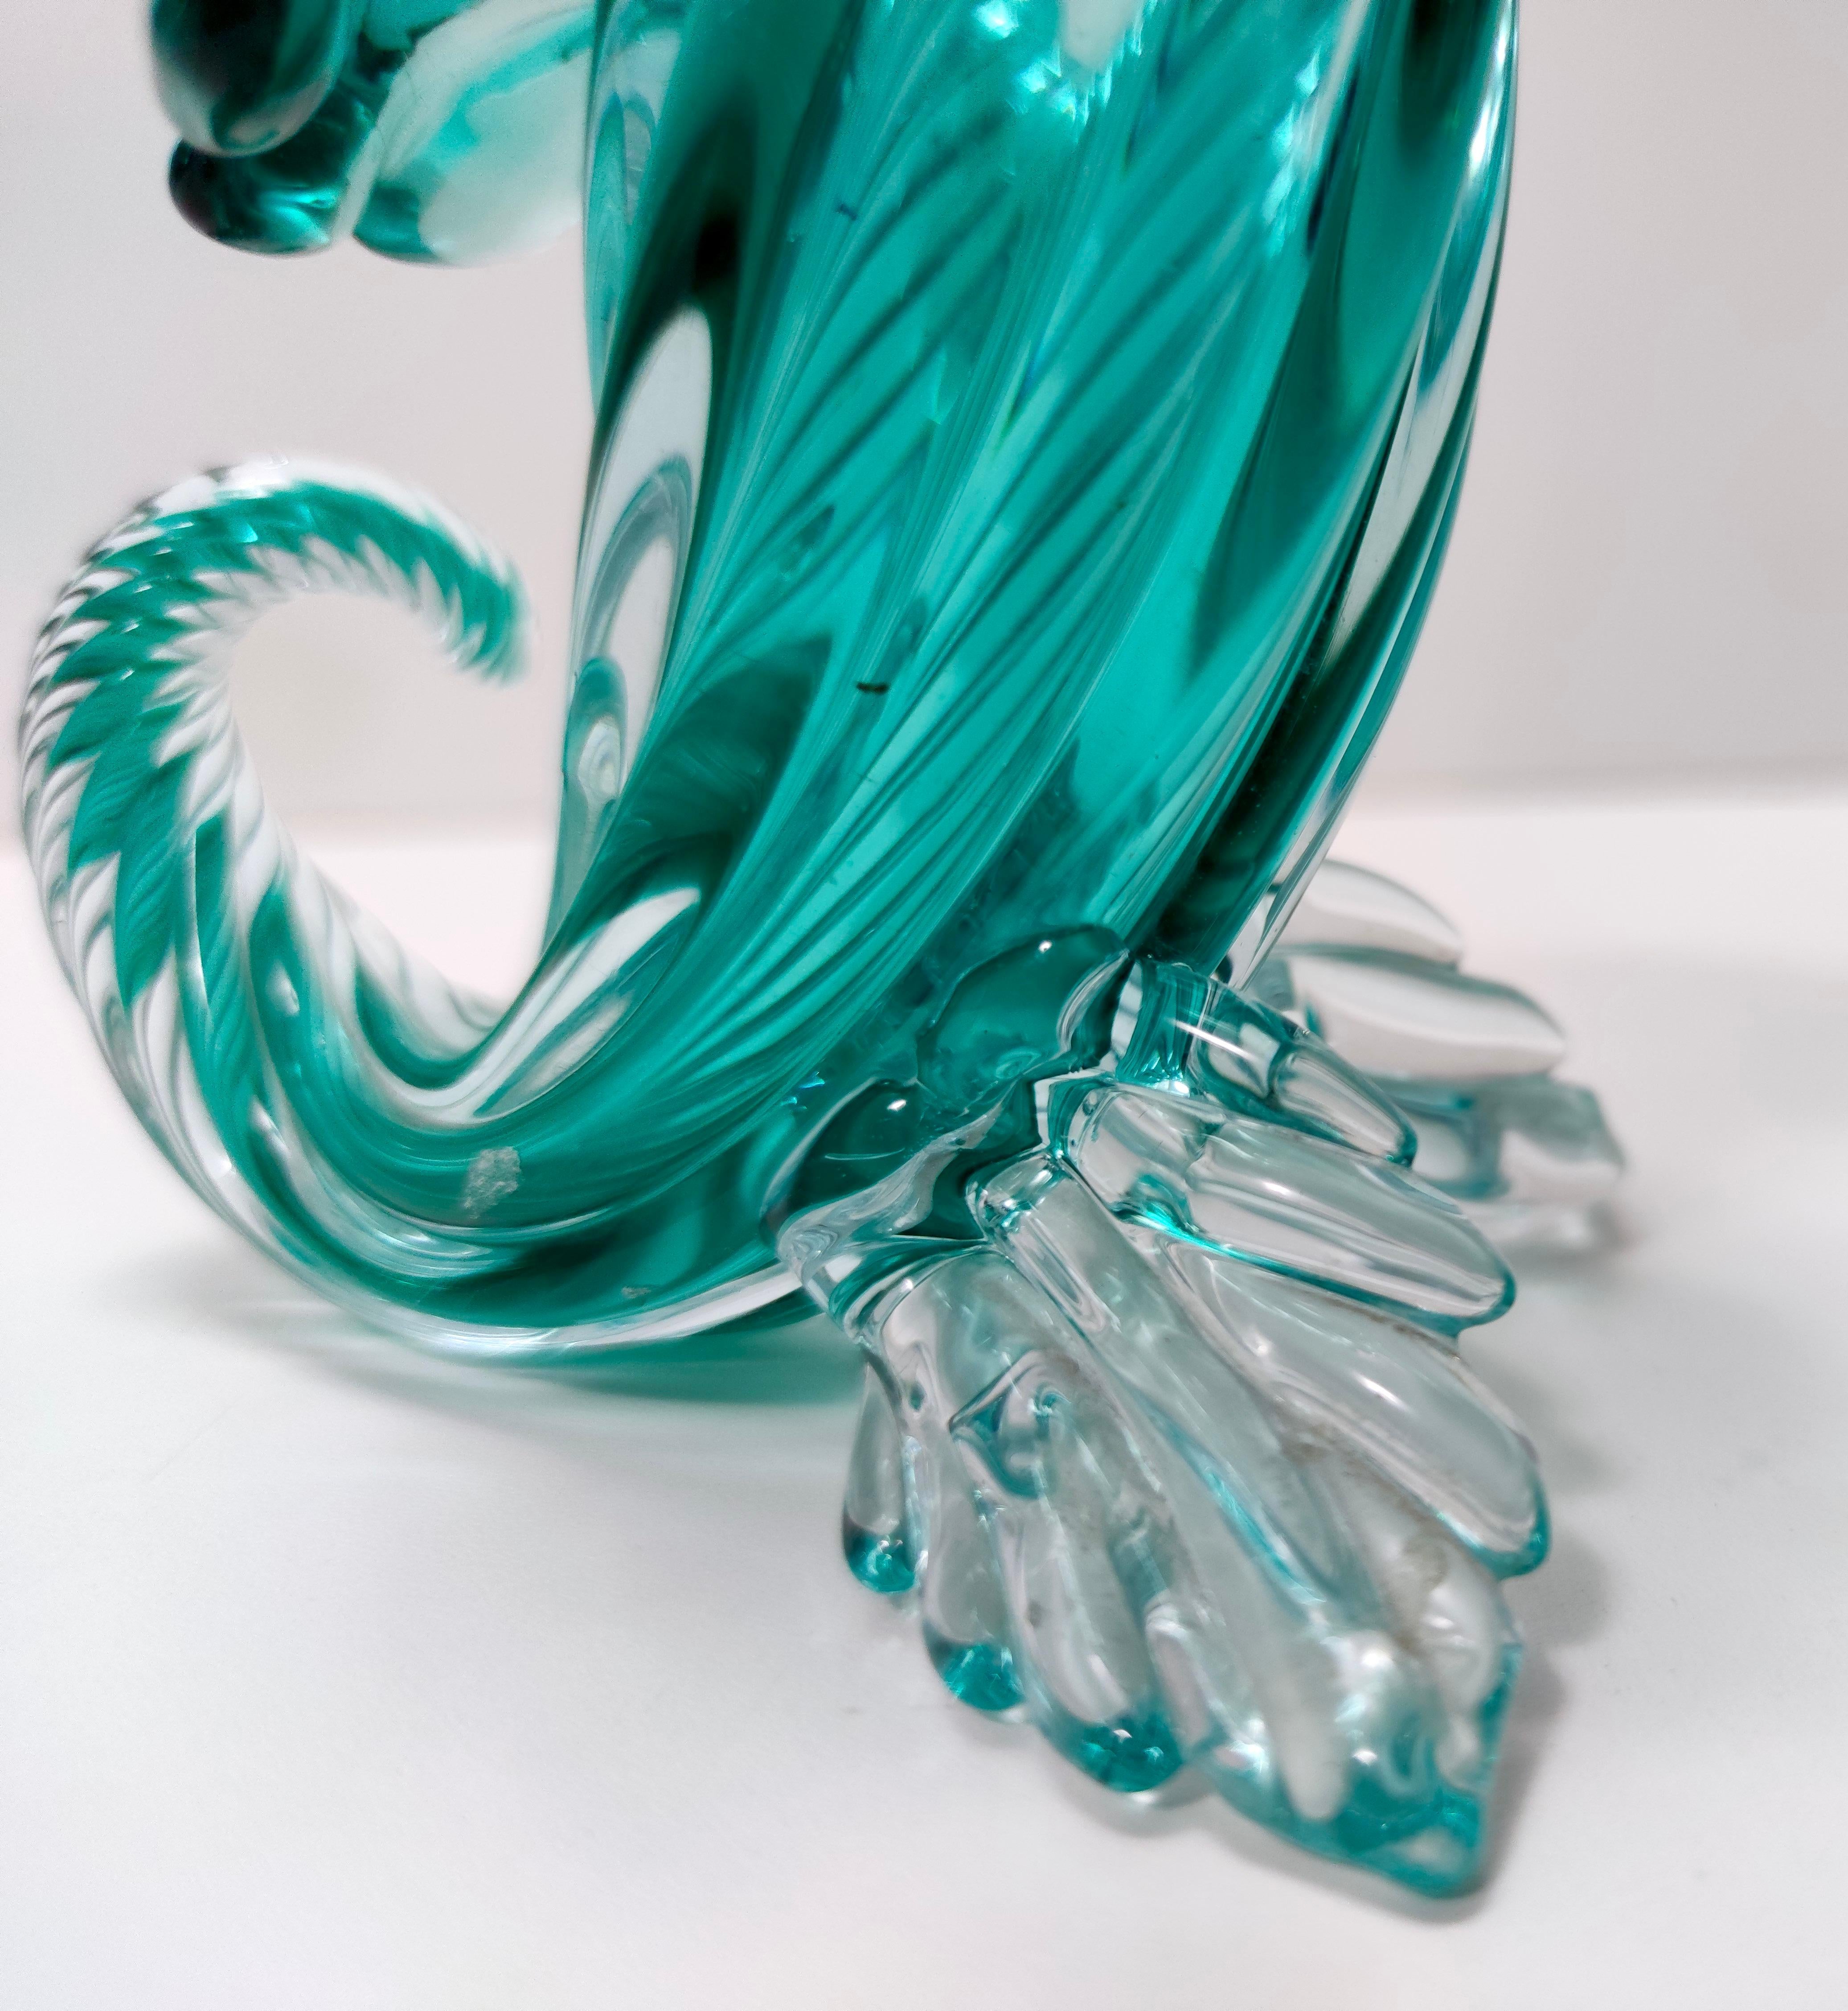 Vintage Teal Murano Glass Cornucopia Vase by Archimede Seguso, Italy For Sale 8